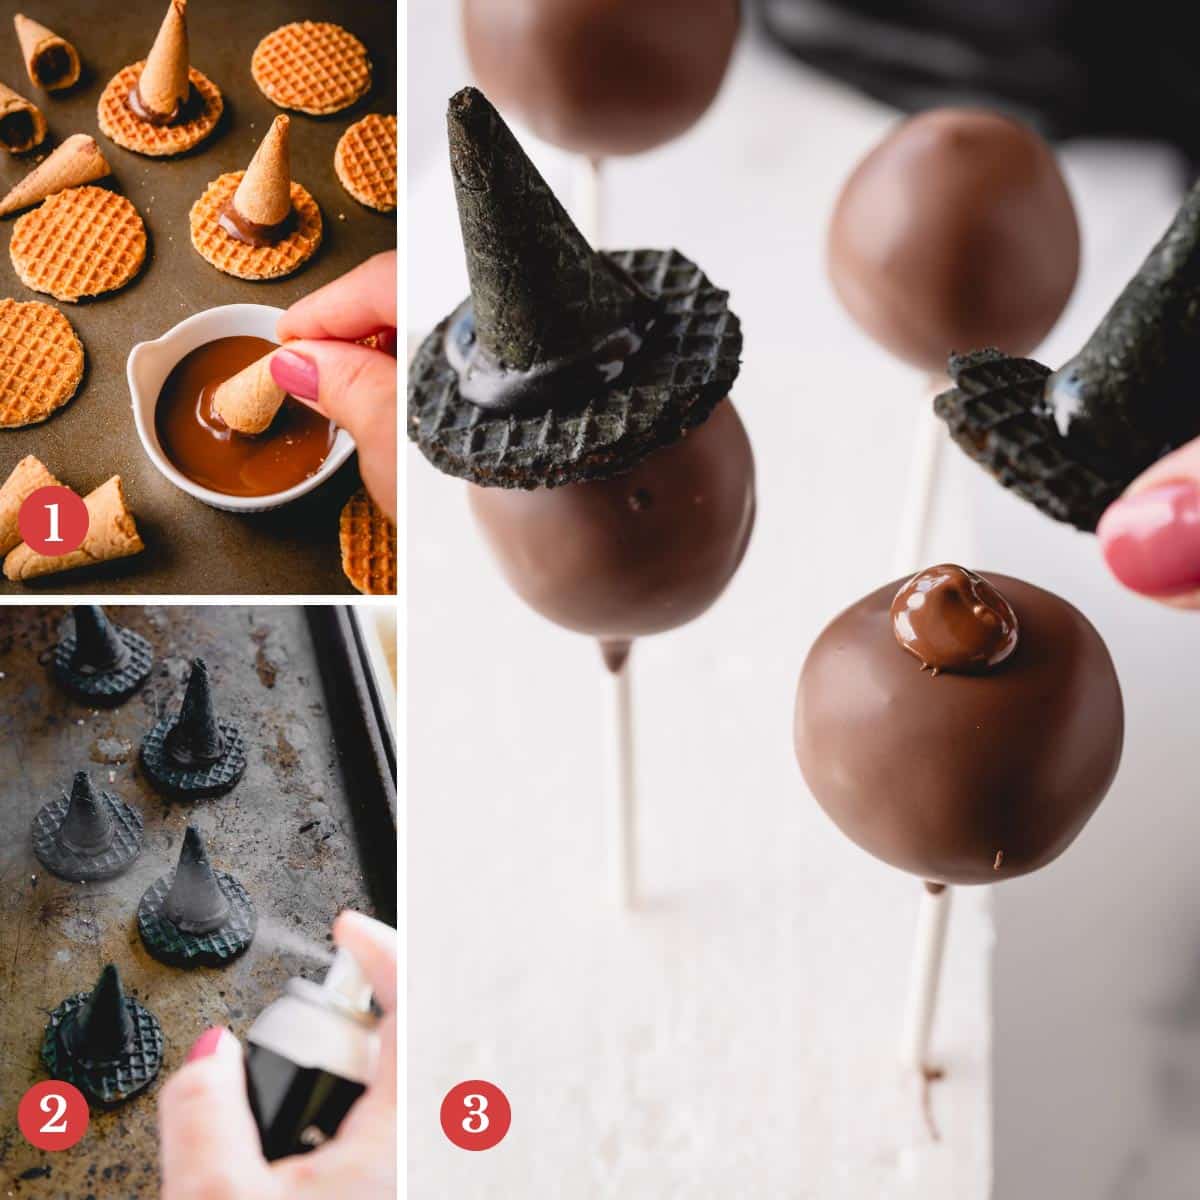 Three images showing the process of assembling chocolate cake pops with witches' hats.